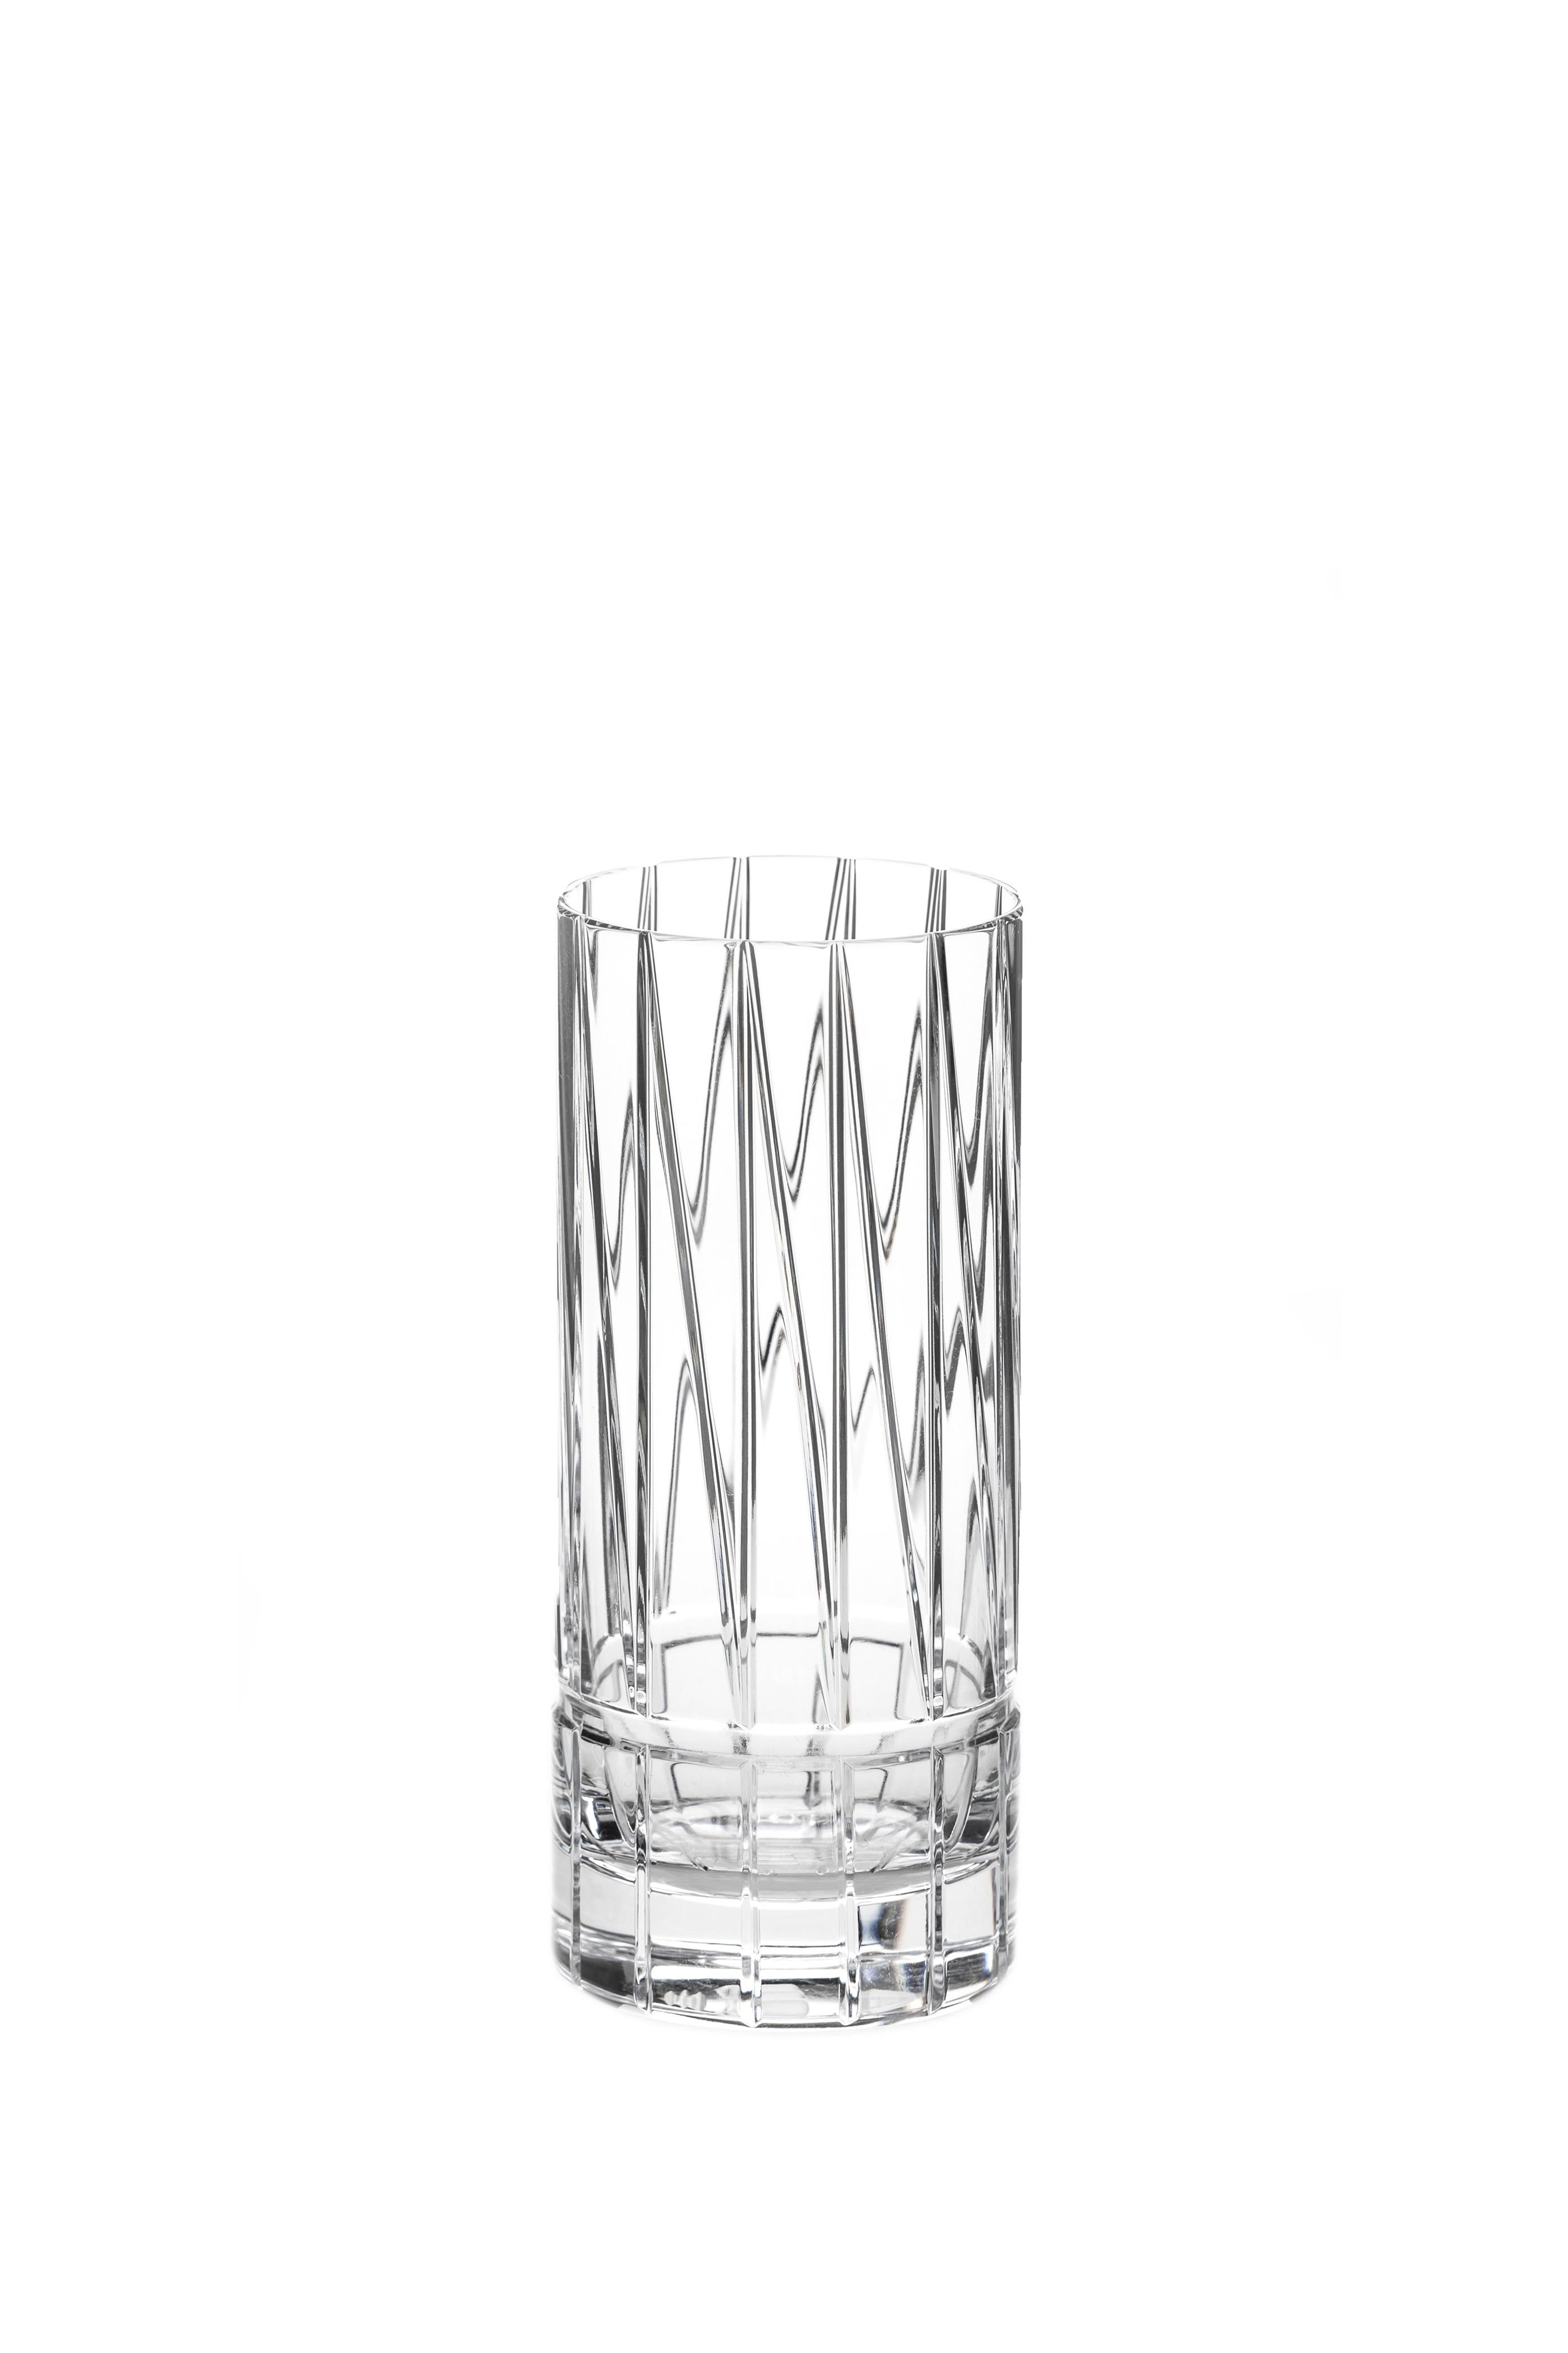 Hand-Crafted Scholten & Baijings Handmade Irish Crystal High Glass Elements Series CUT NO V For Sale